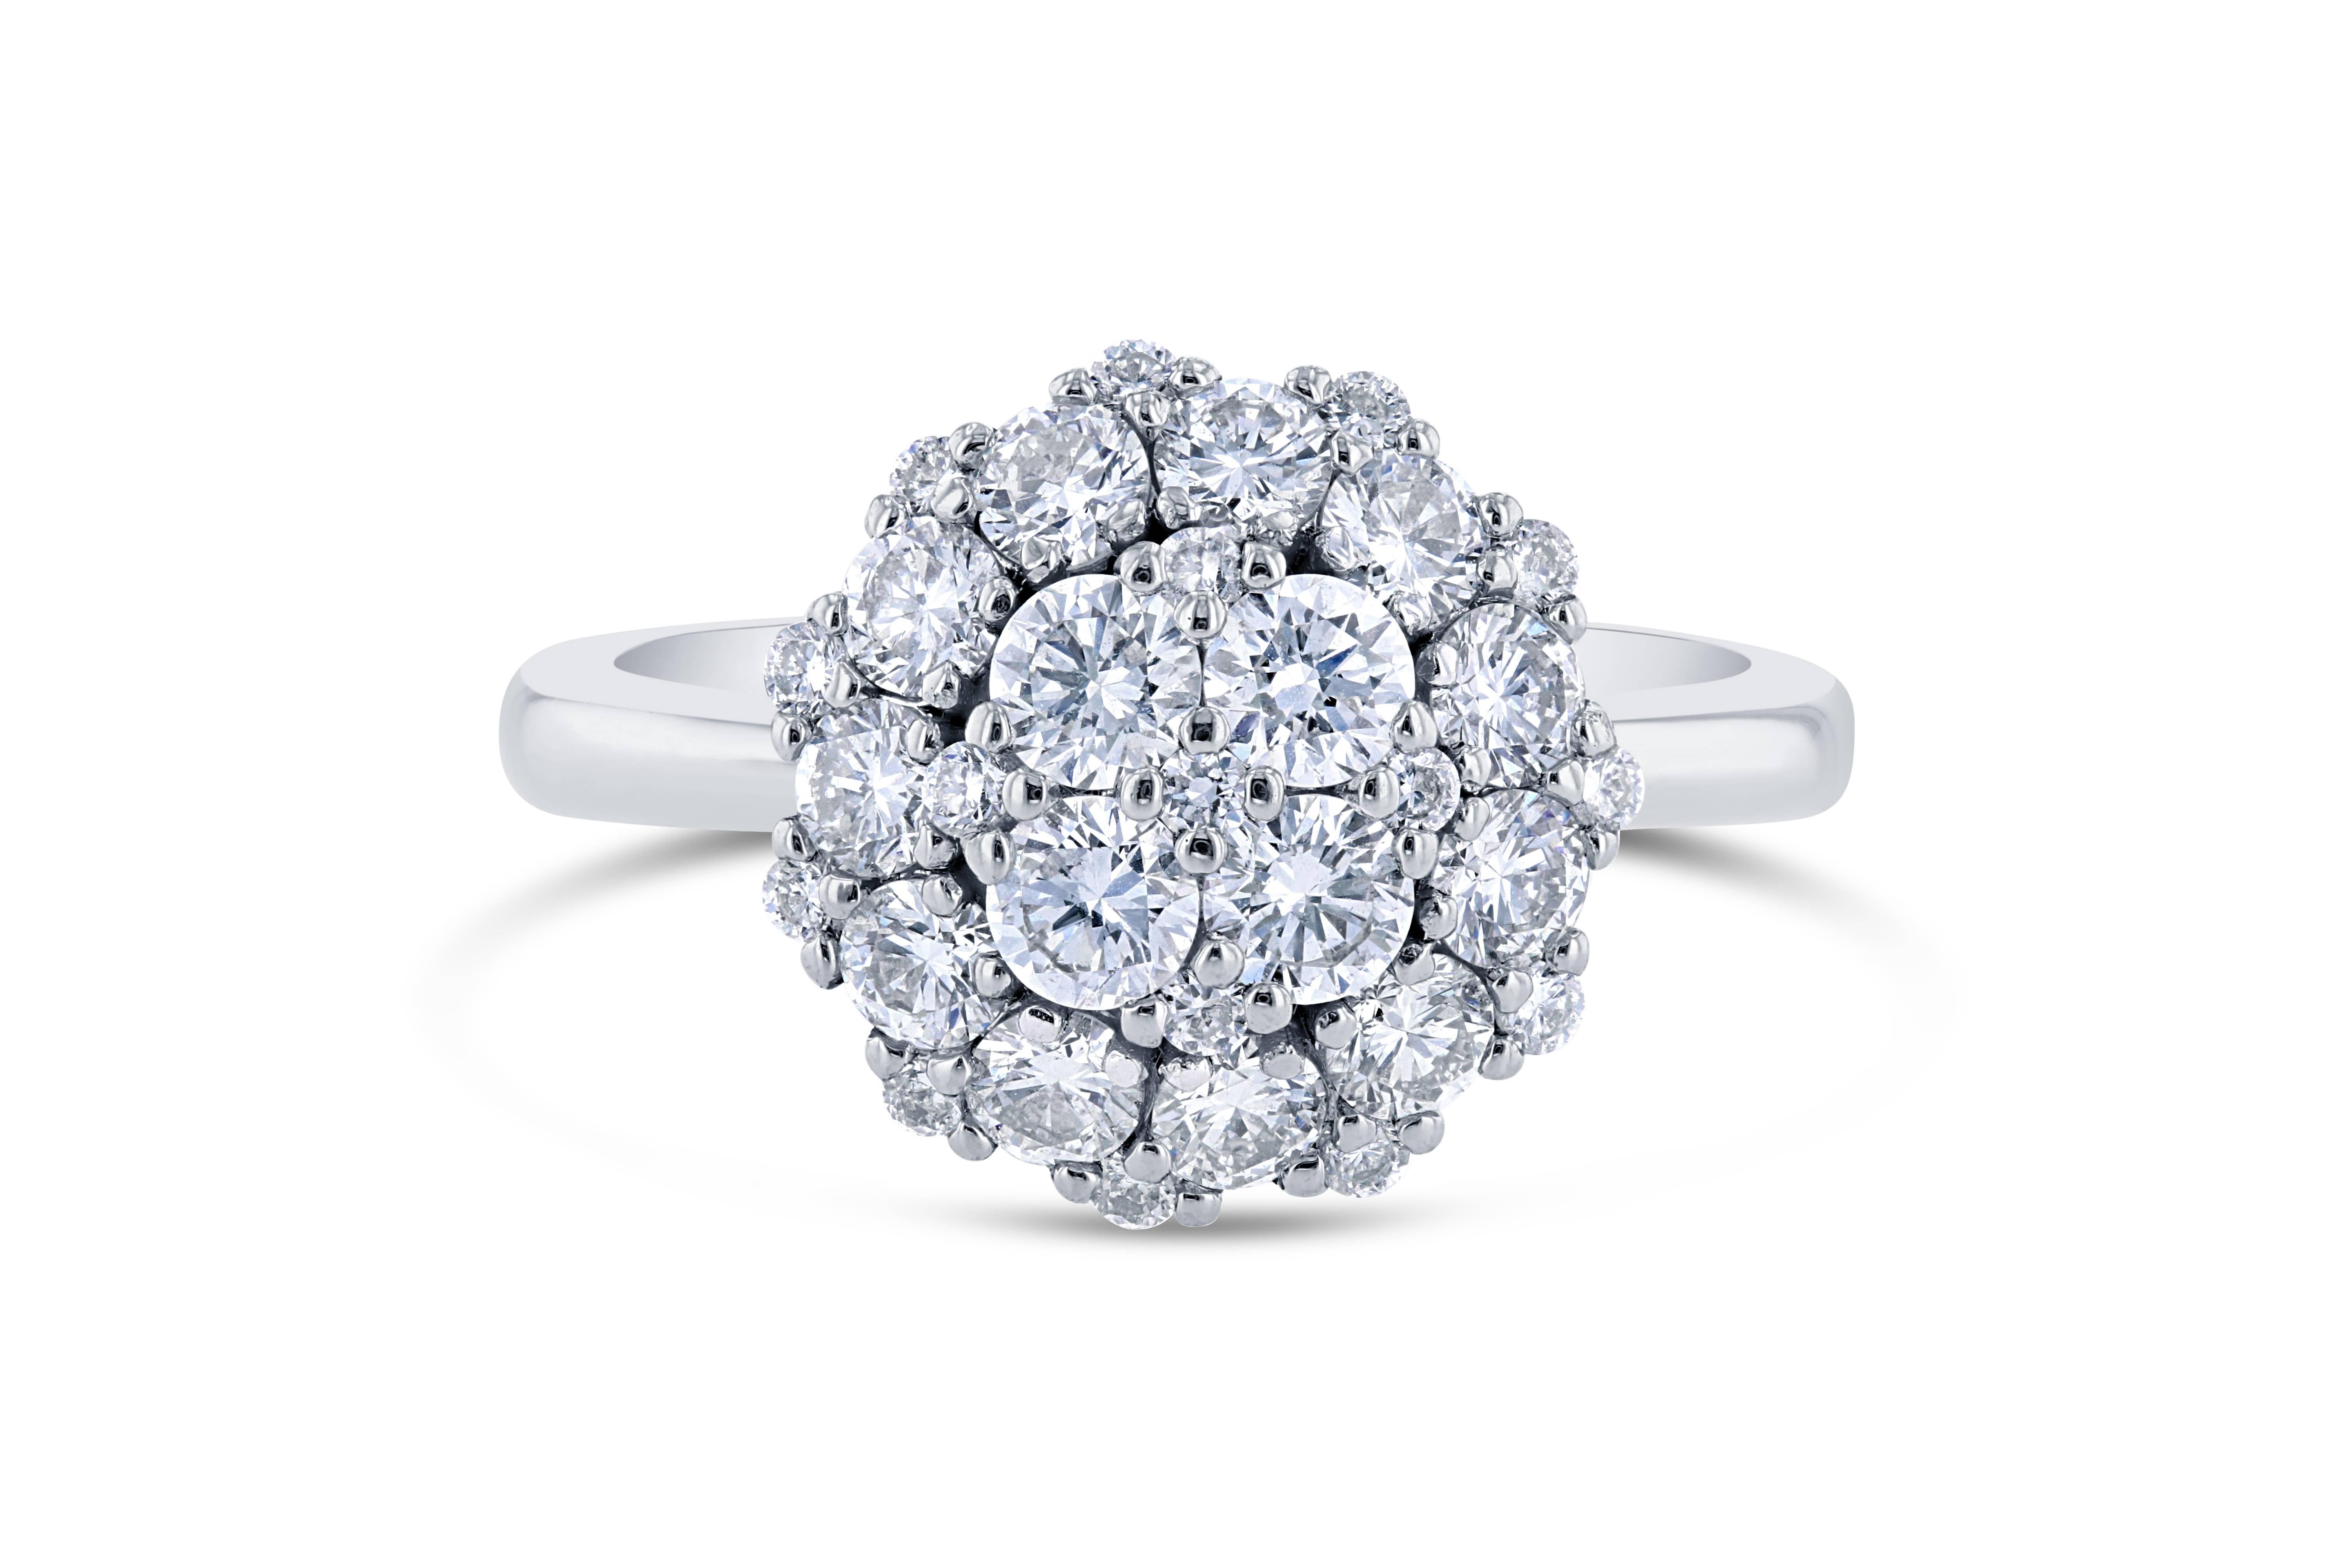 A gorgeous cocktail ring that will fulfill all your desires! A real stunner! Do not miss this unique diamond ring!

It has 31 Round Cut Diamonds that weigh a total of 1.46 Carats. The clarity and color of the diamonds are VS-F. 

It is beautifully